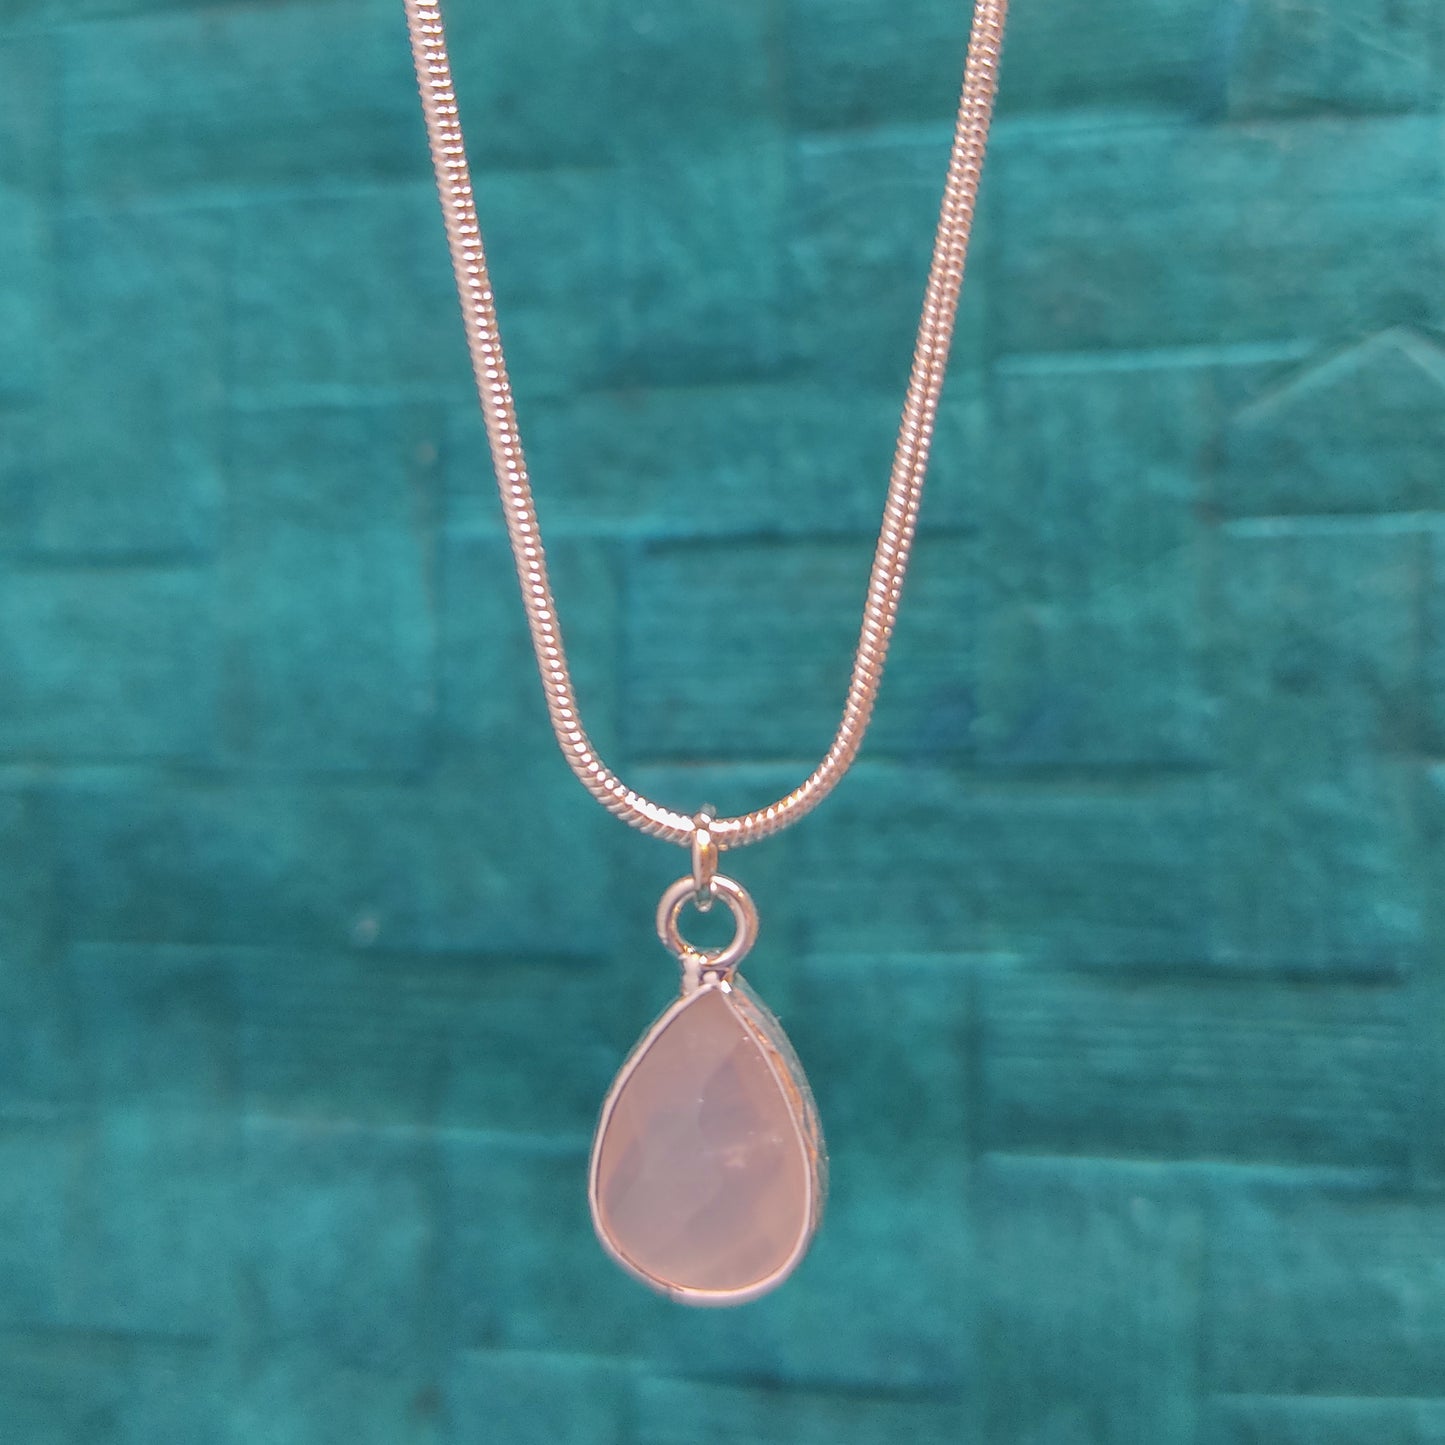 Minimalist Necklace Gift - Rose Quartz Crystal Water Drop - Jewelry Love Gift